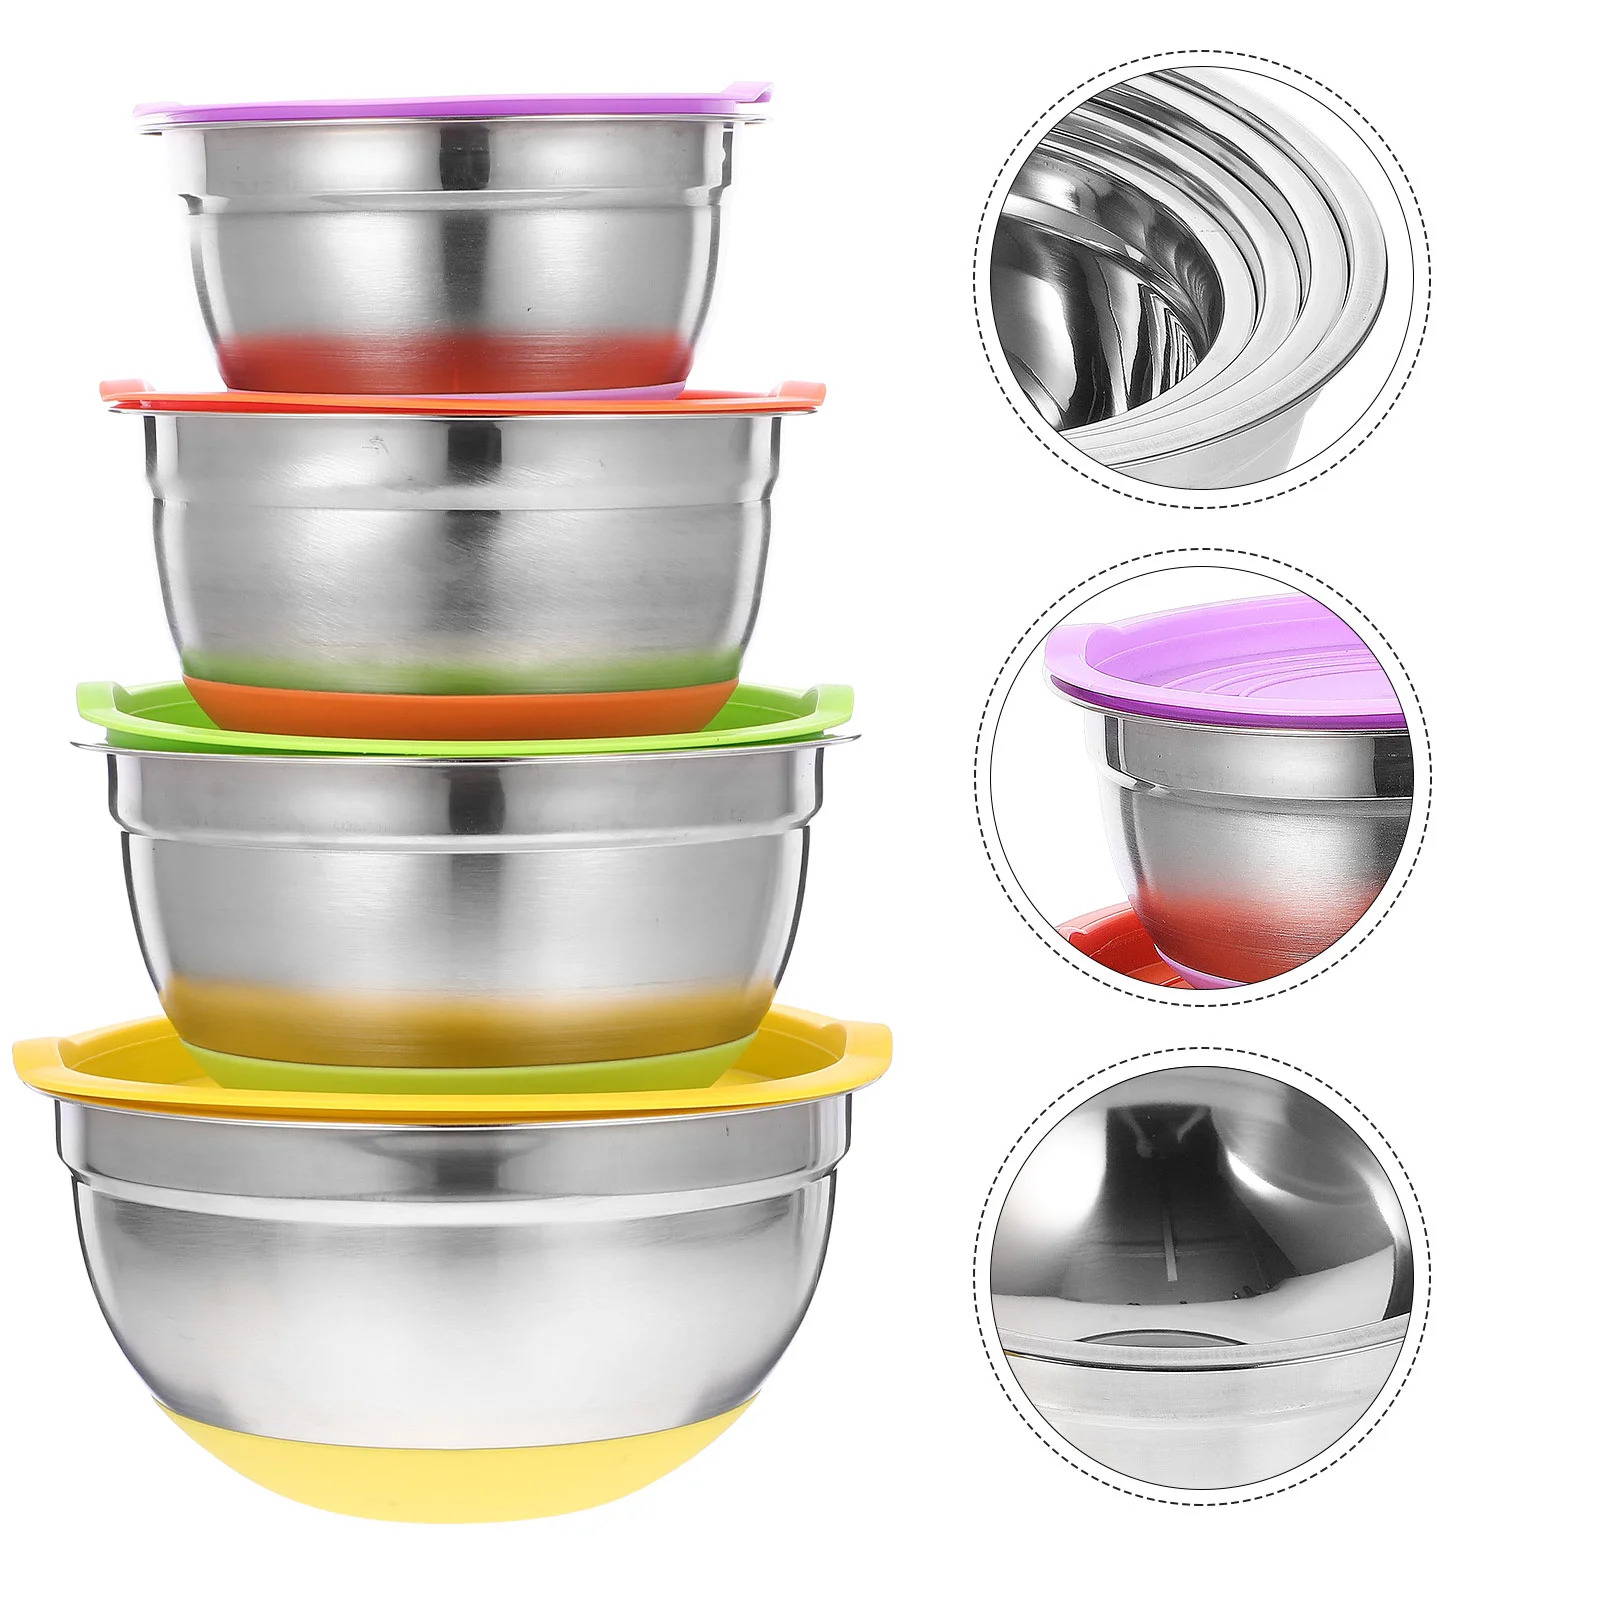 

4 Pcs Non-slip Mixing Bowl Salad Stainless Steel Serving Bowls Kitchen Noodle Food Convenient Household Cooking Accessories